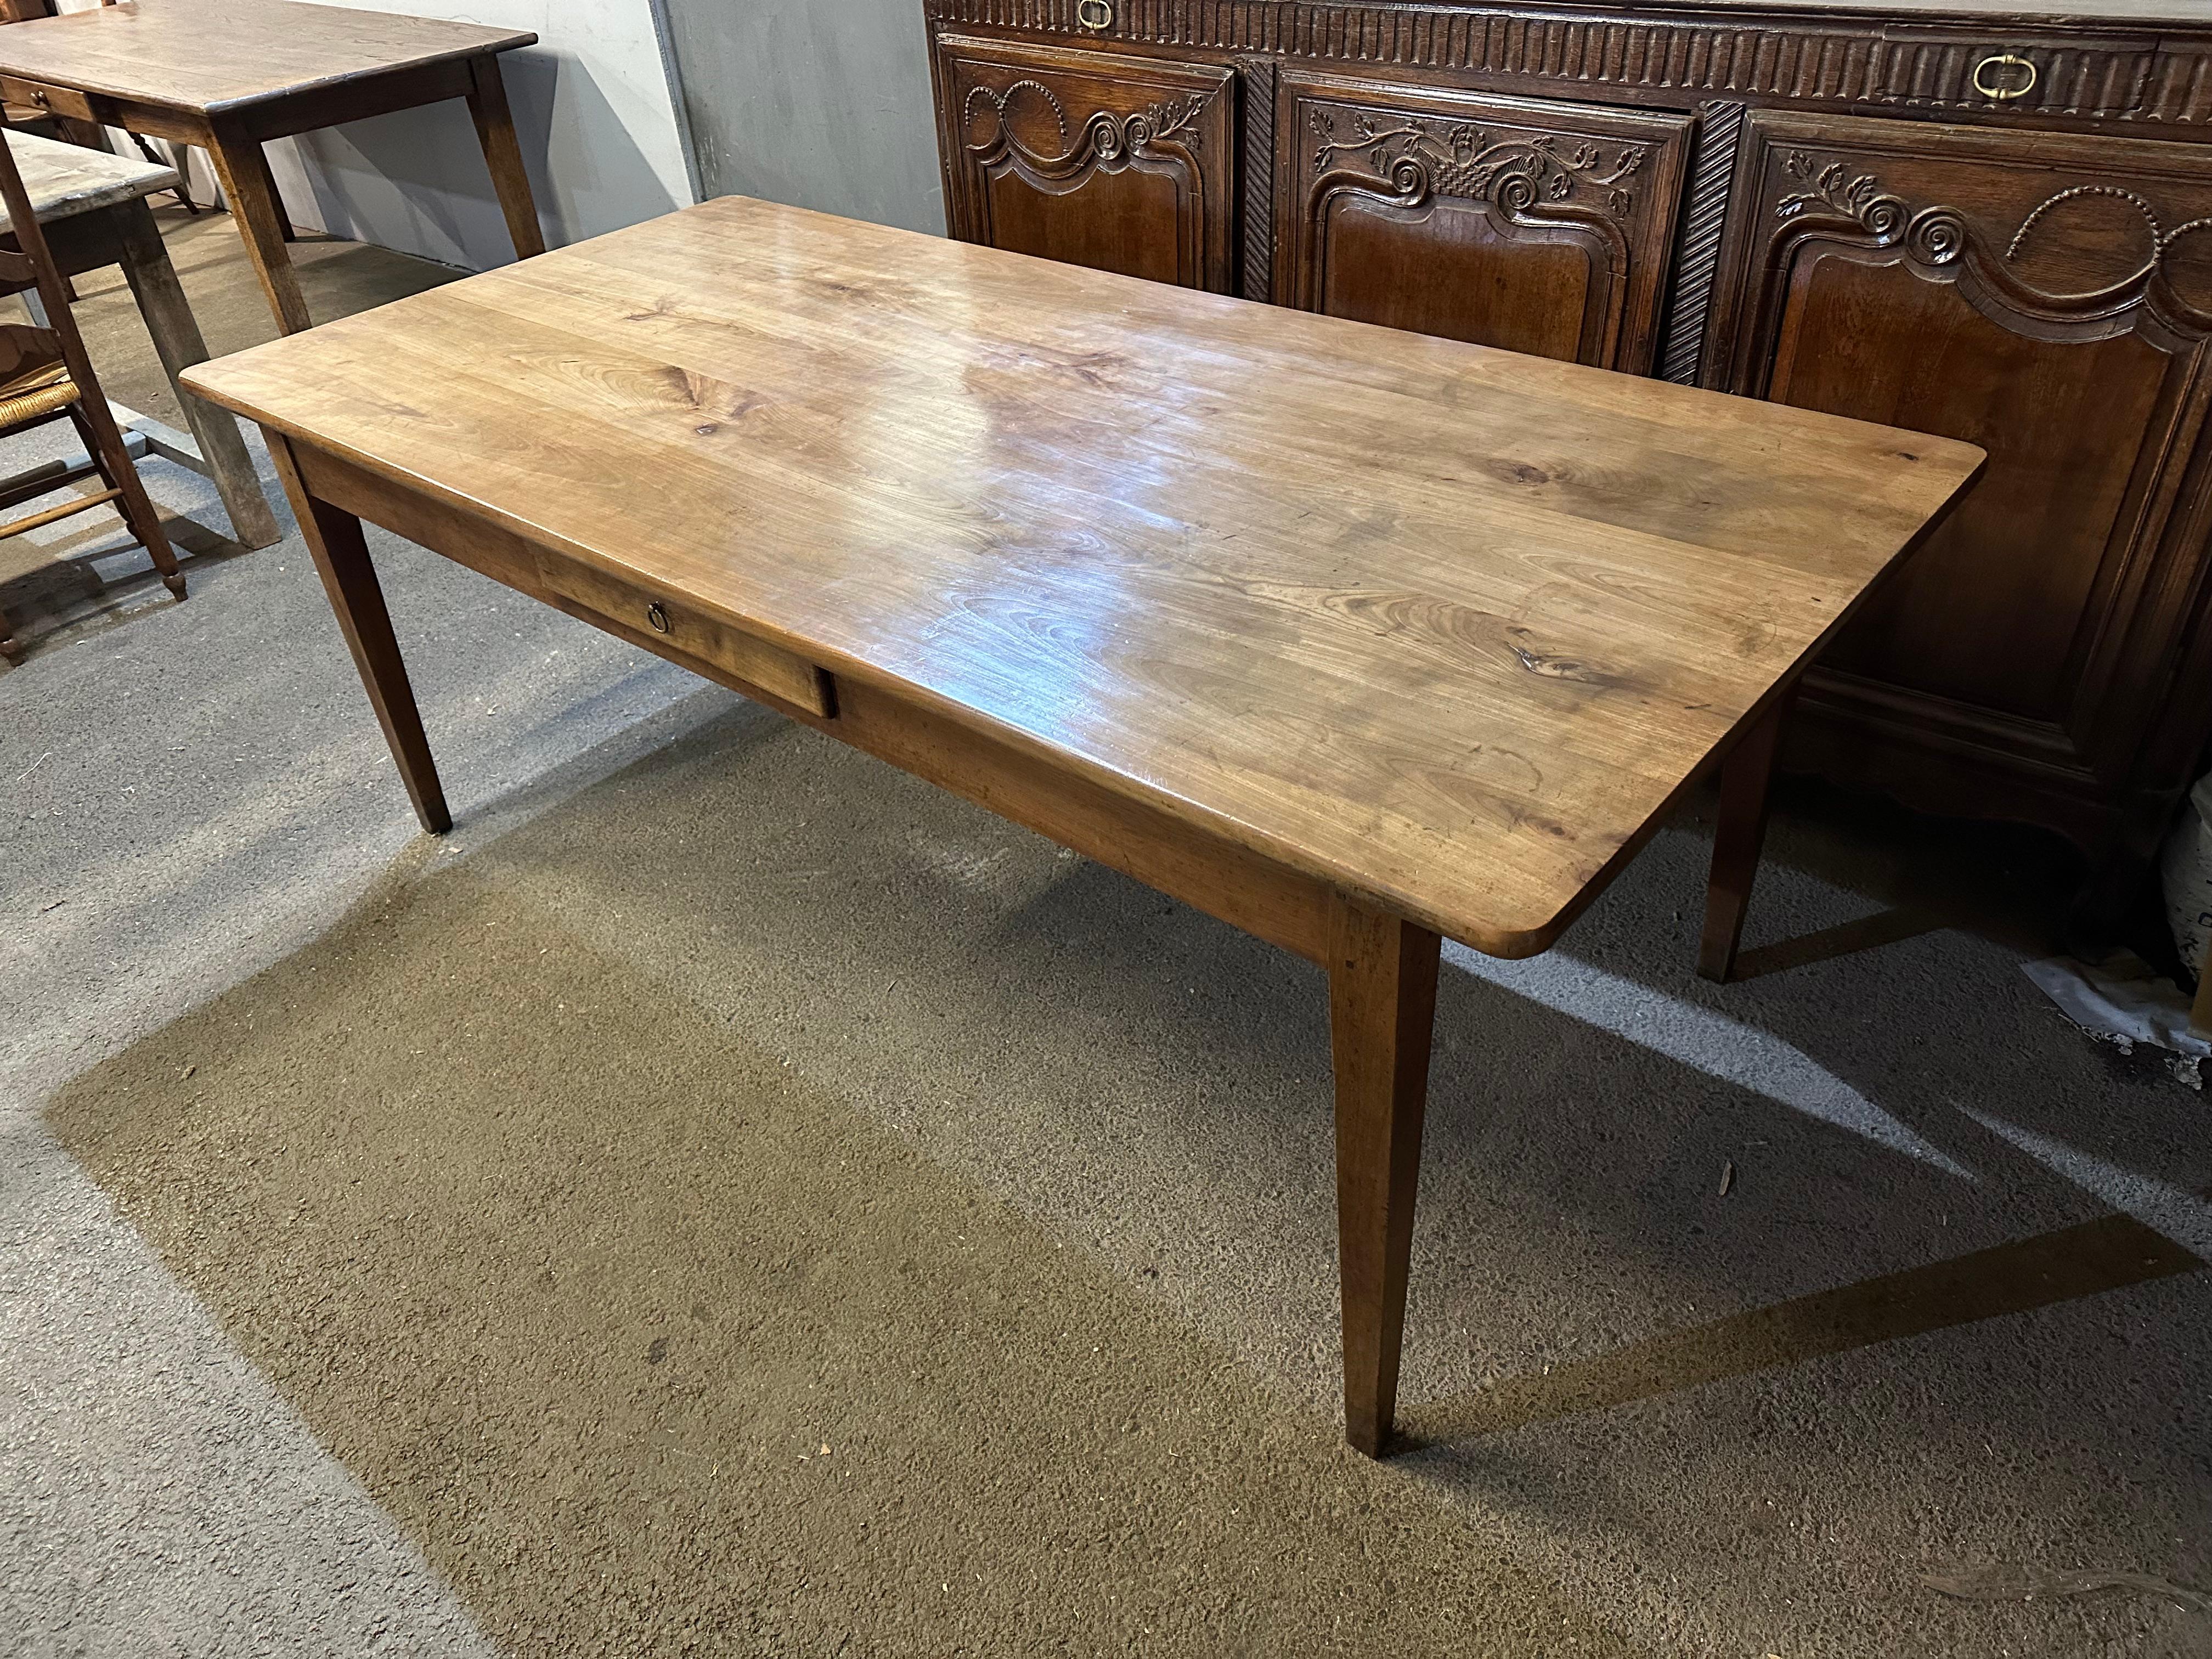 19th Century Wide Cherry Dining Table with One Drawer In Good Condition For Sale In Billingshurst, GB